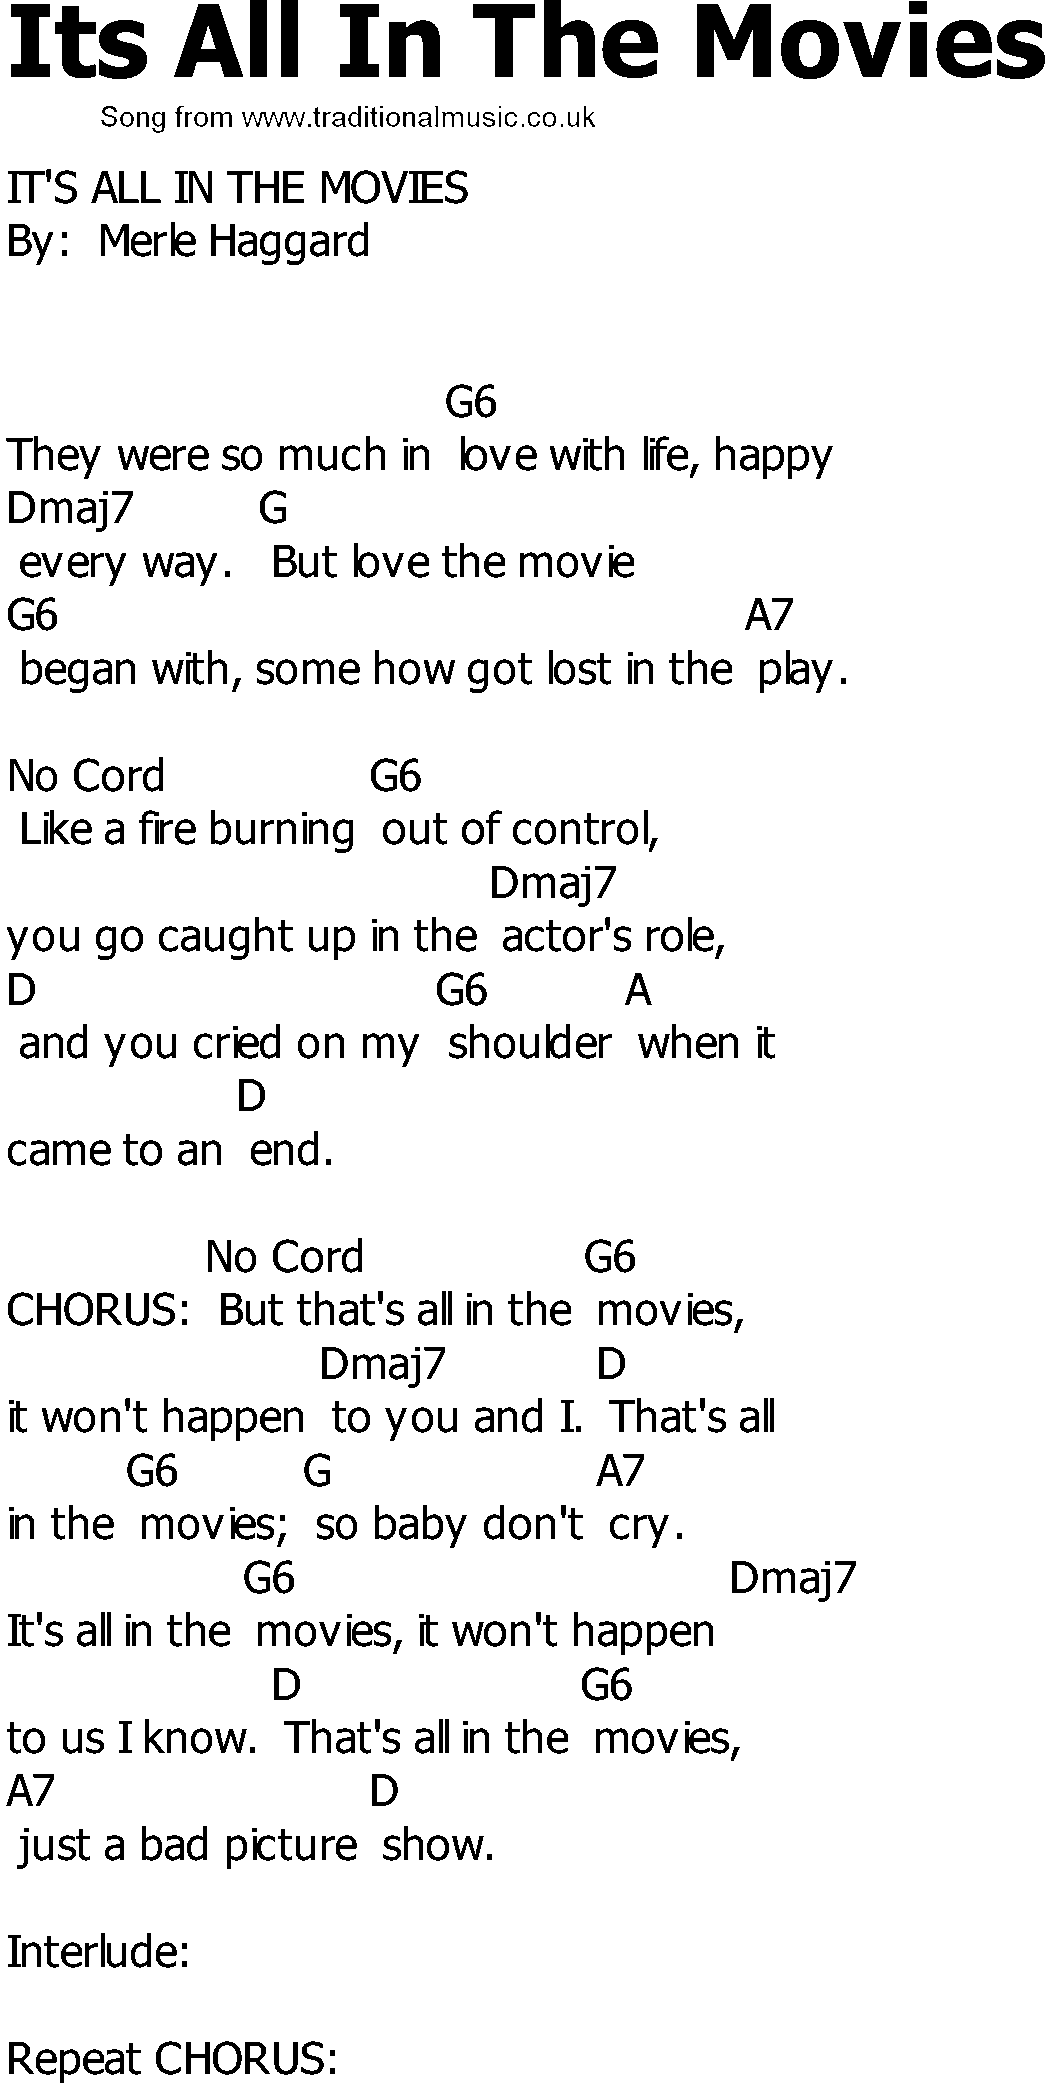 Old Country song lyrics with chords - Its All In The Movies